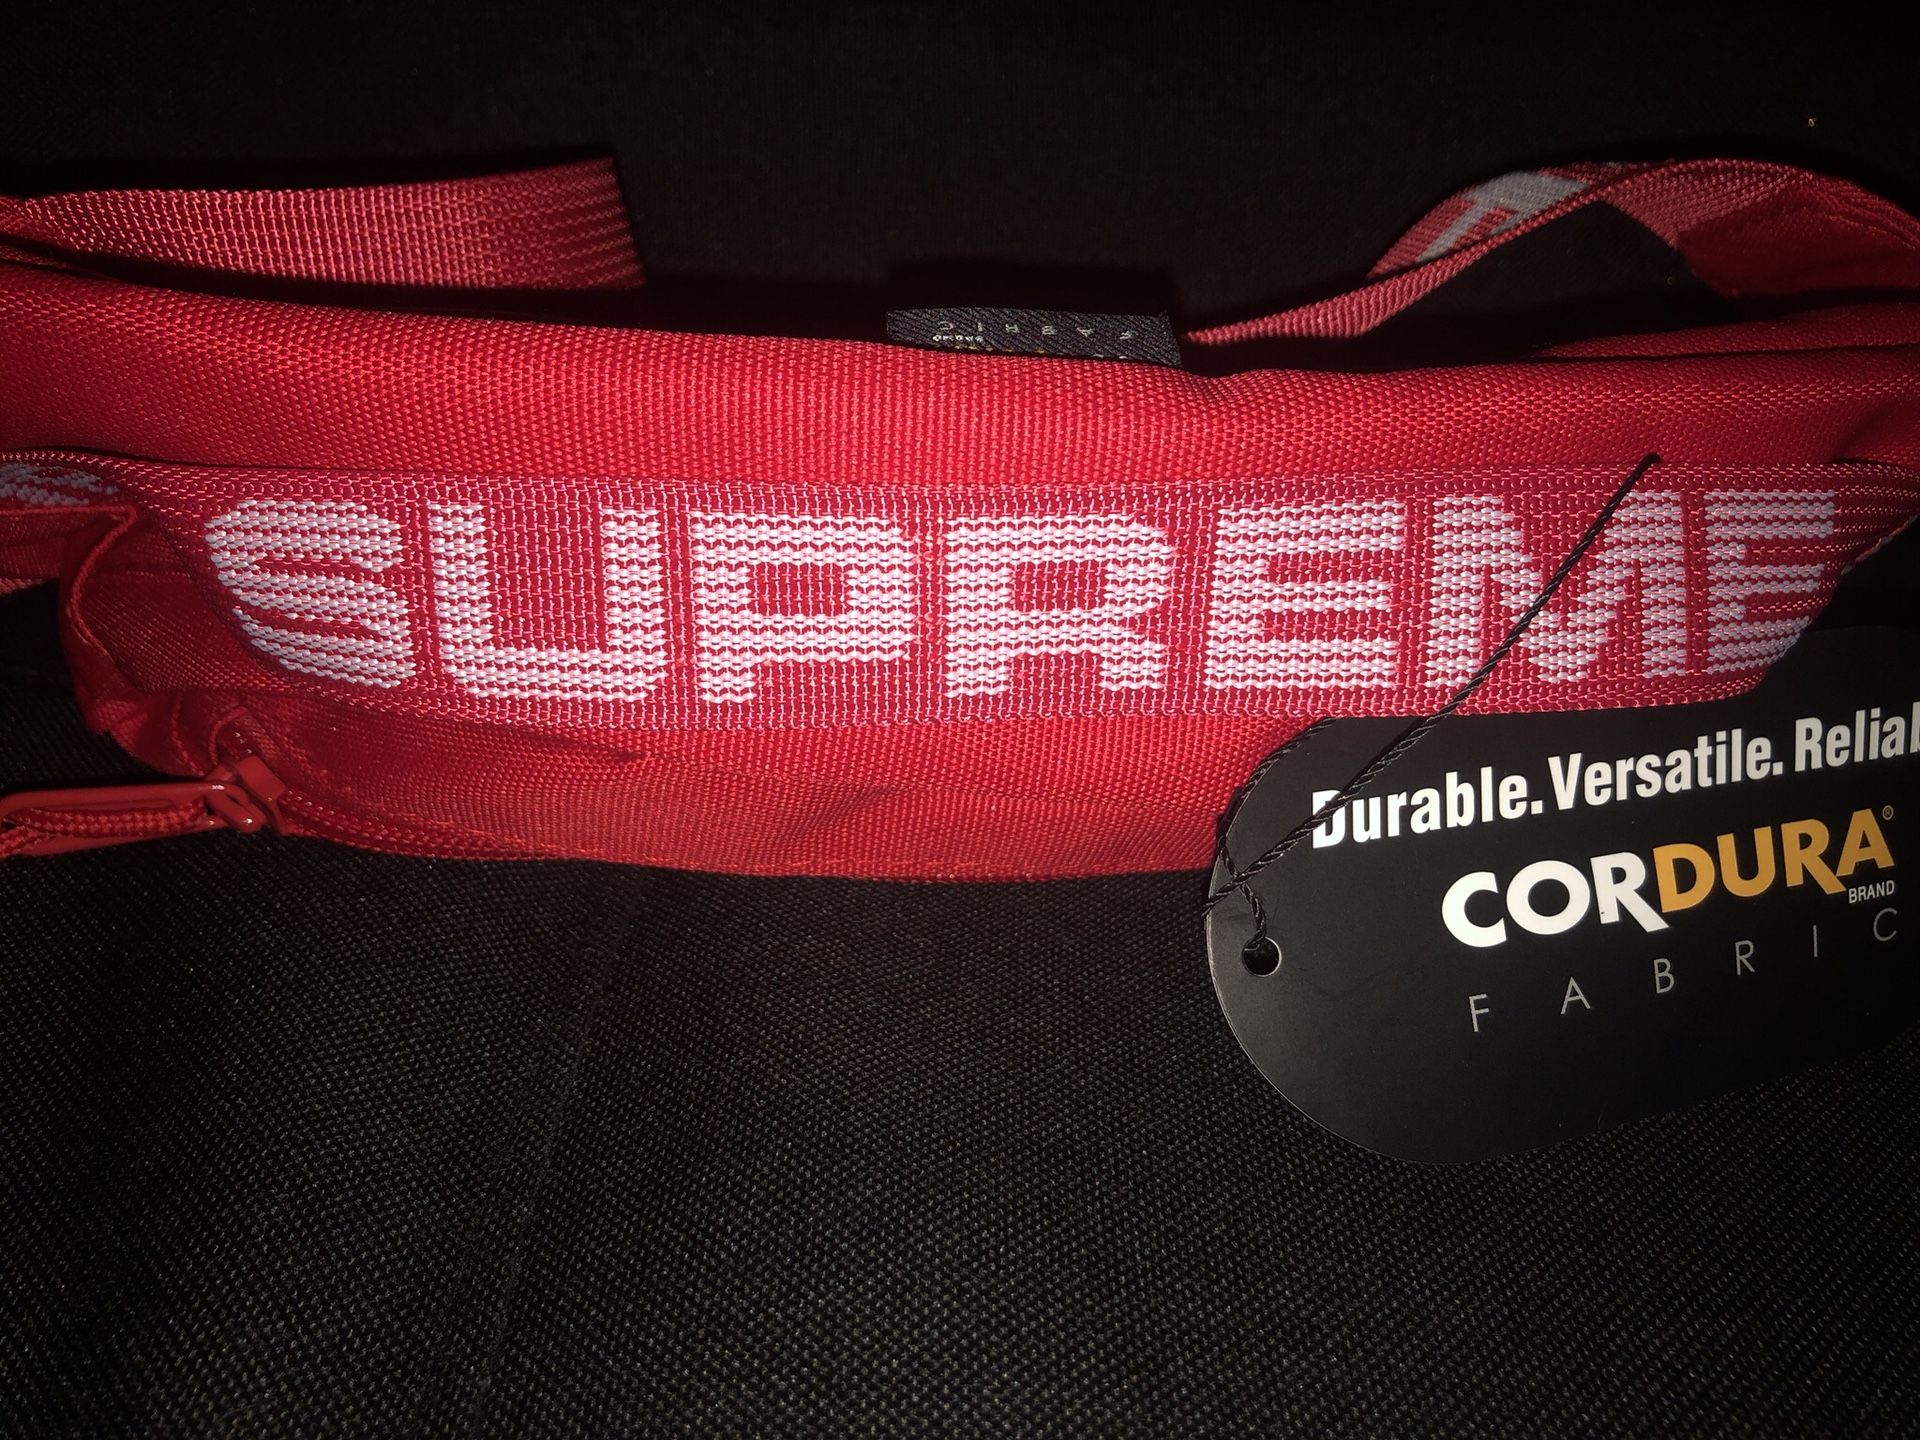 supreme waist bag (SS20) for Sale in Clifton, NJ - OfferUp